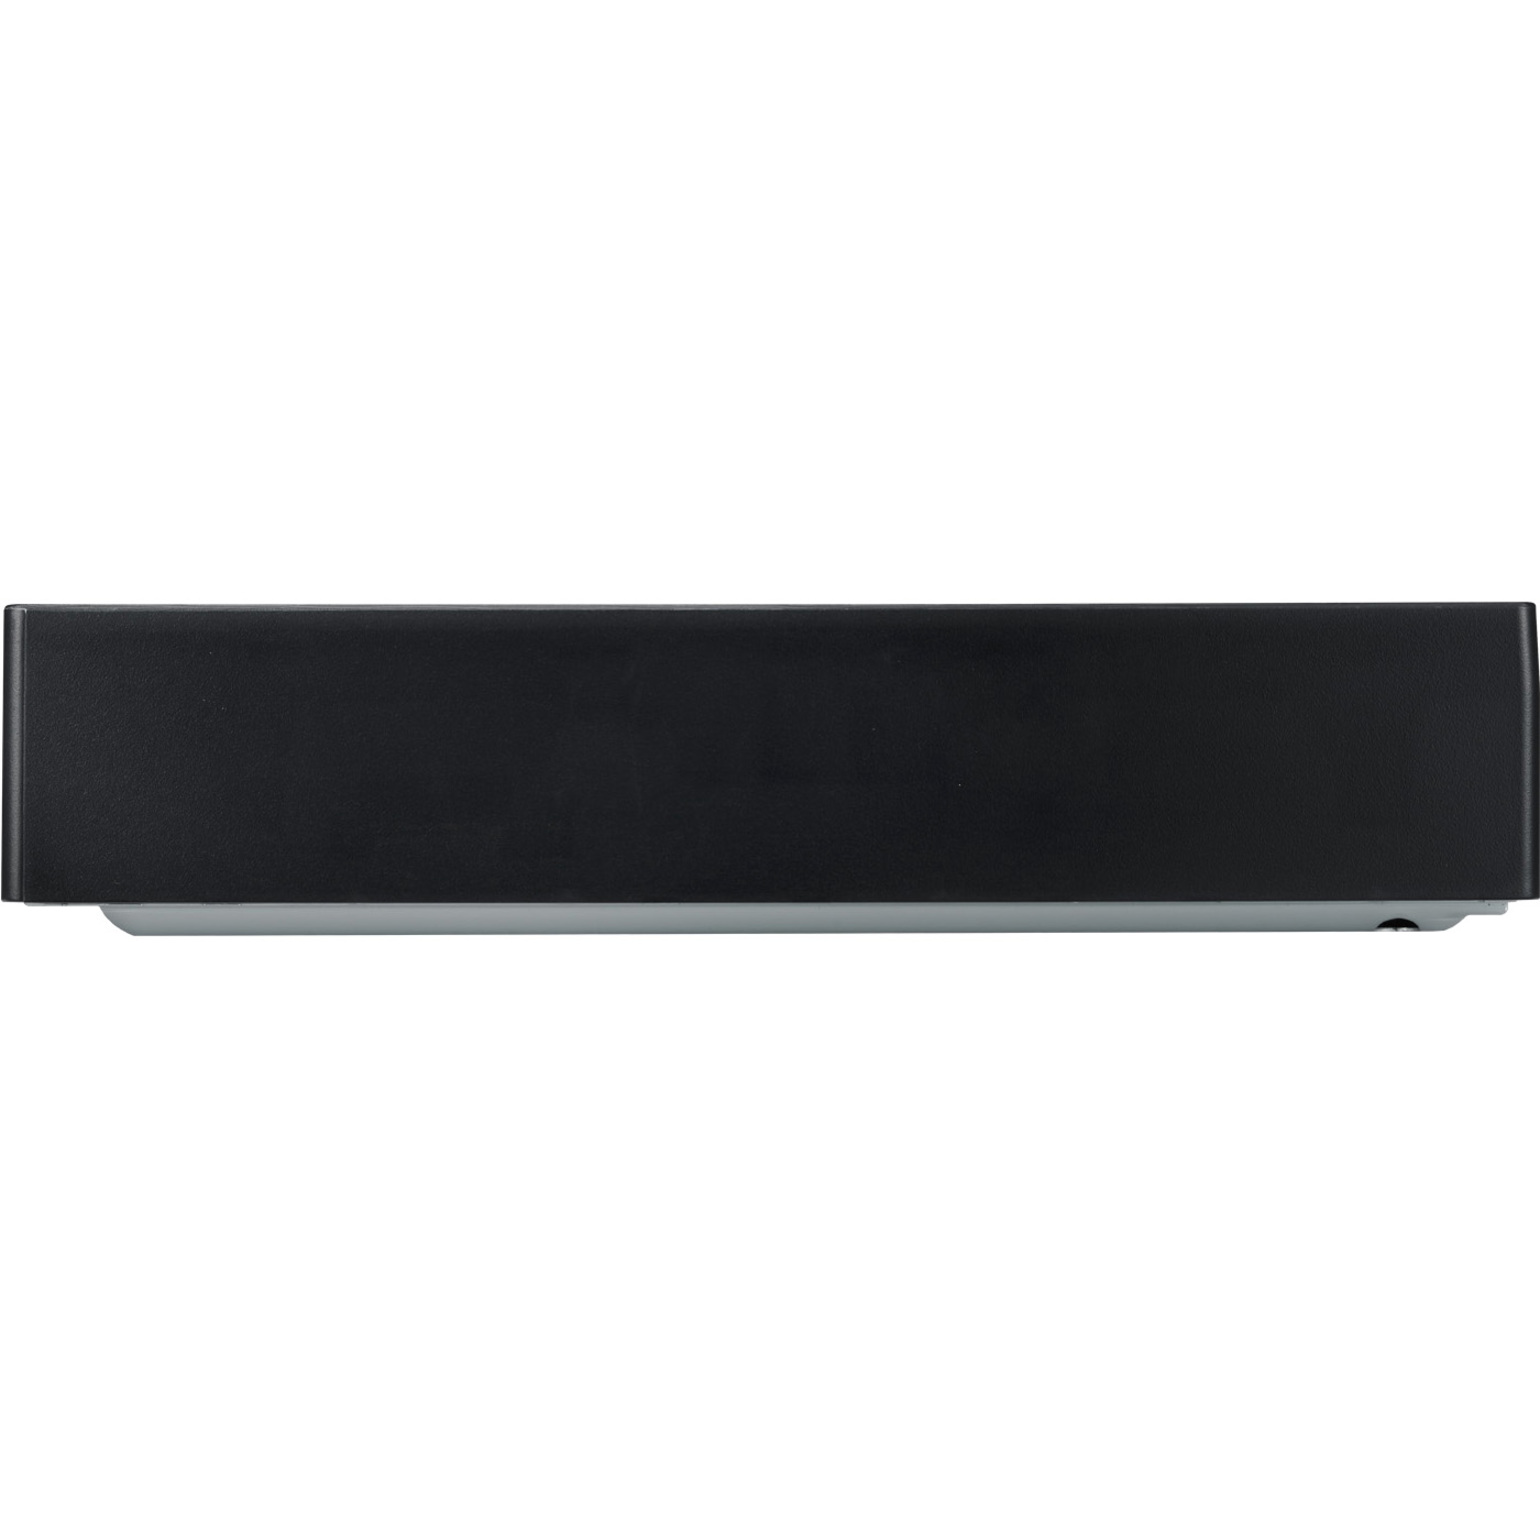 LG UBK90 1 Disc(s) 3D Blu-ray Disc Player, 2160p - image 5 of 14